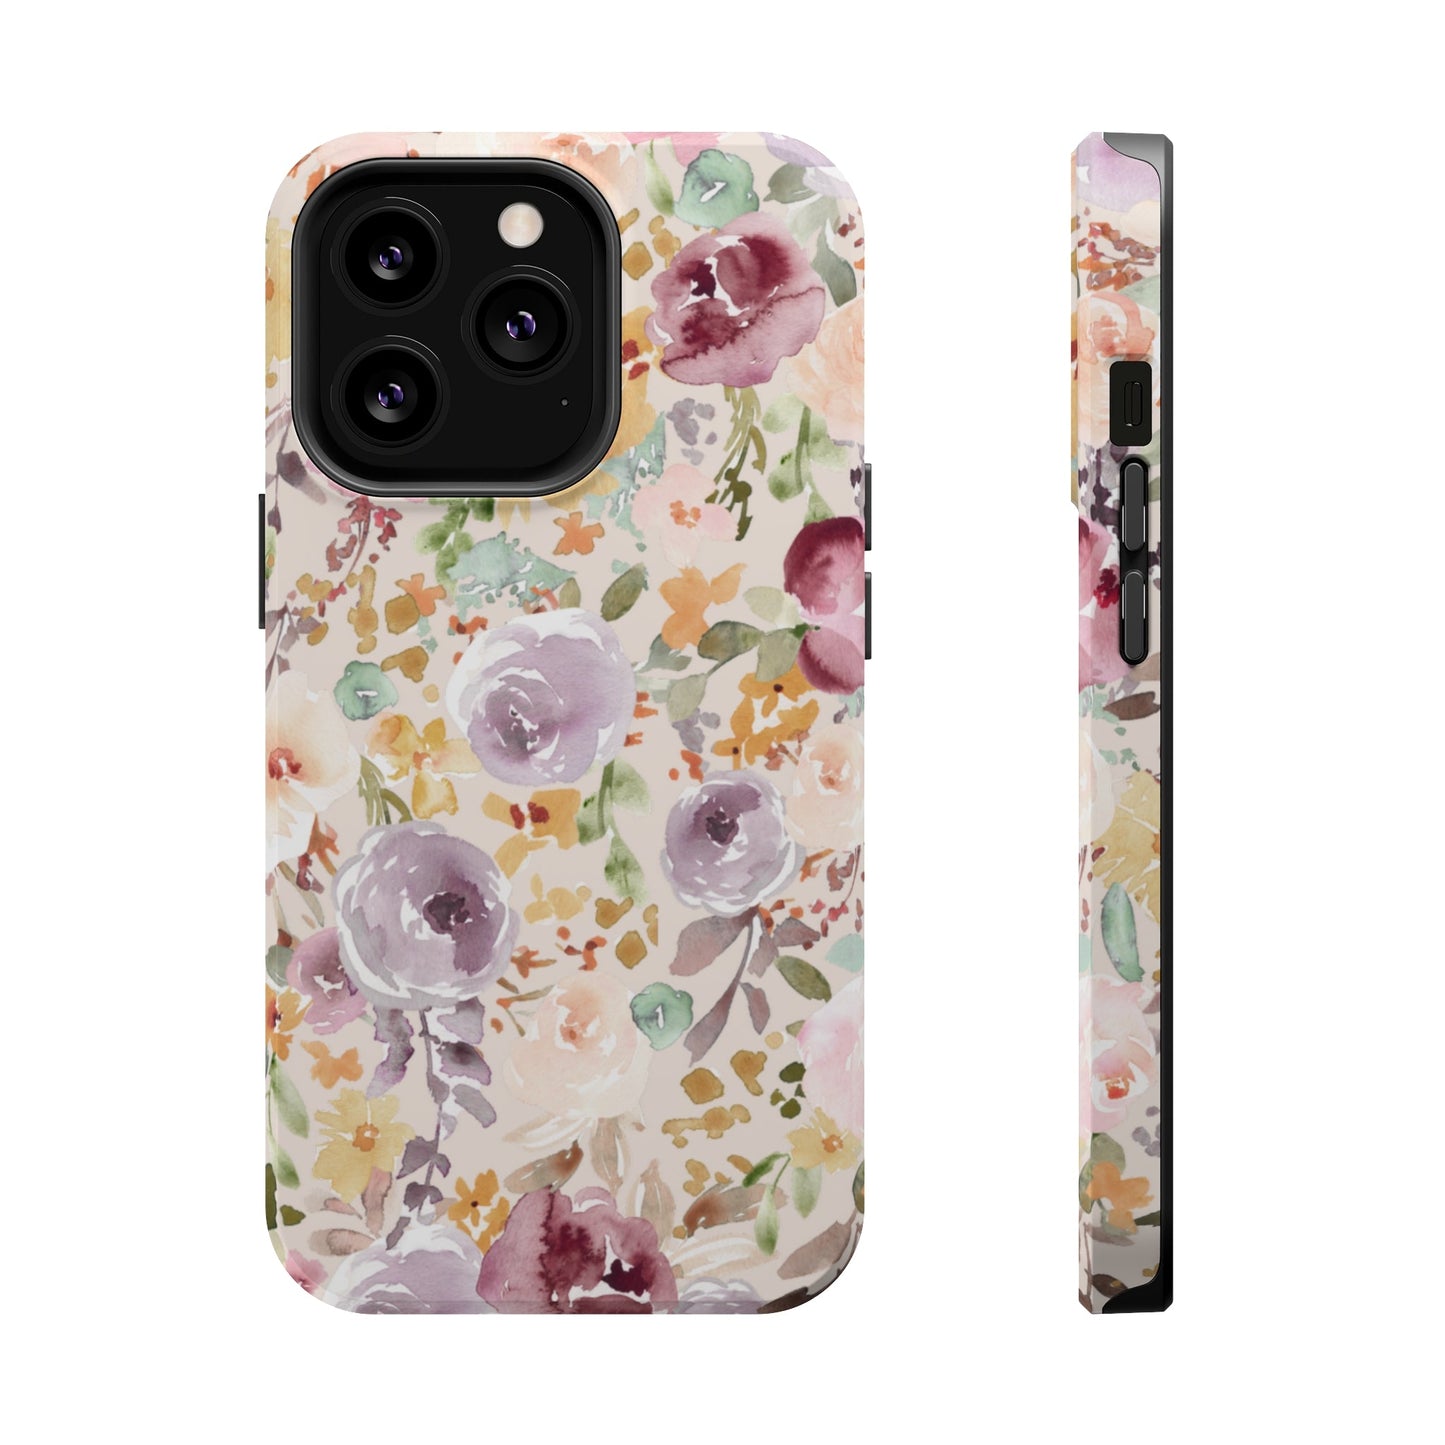 MagSafe iPhone Case - Floral MagSafe Case - Cheerful Lane